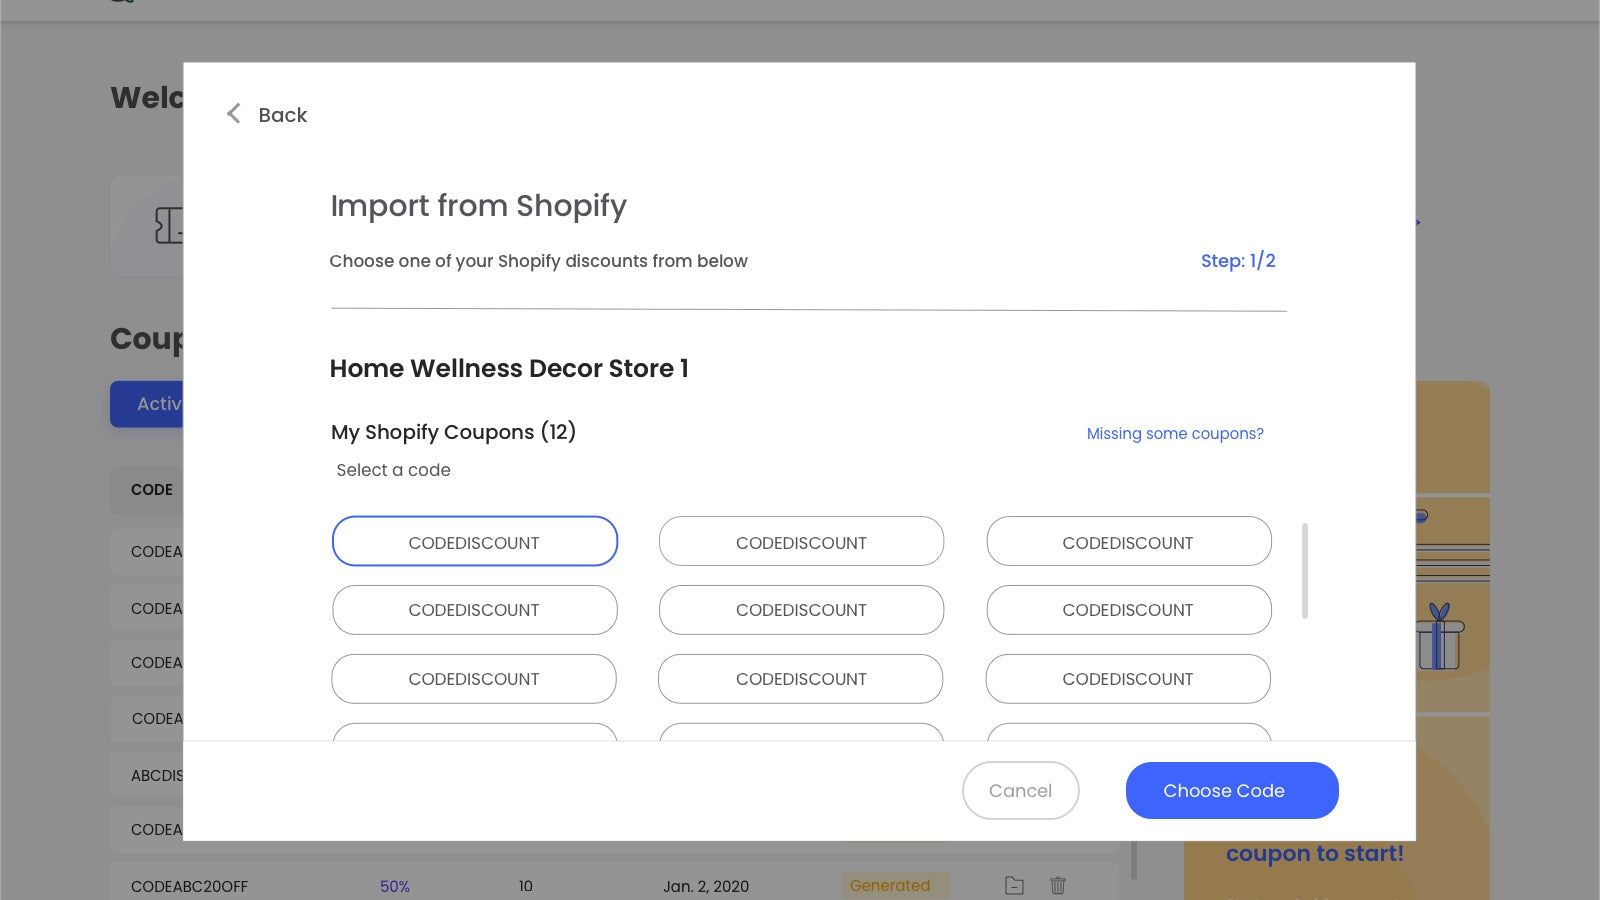 Importing from Shopify Store 2/2